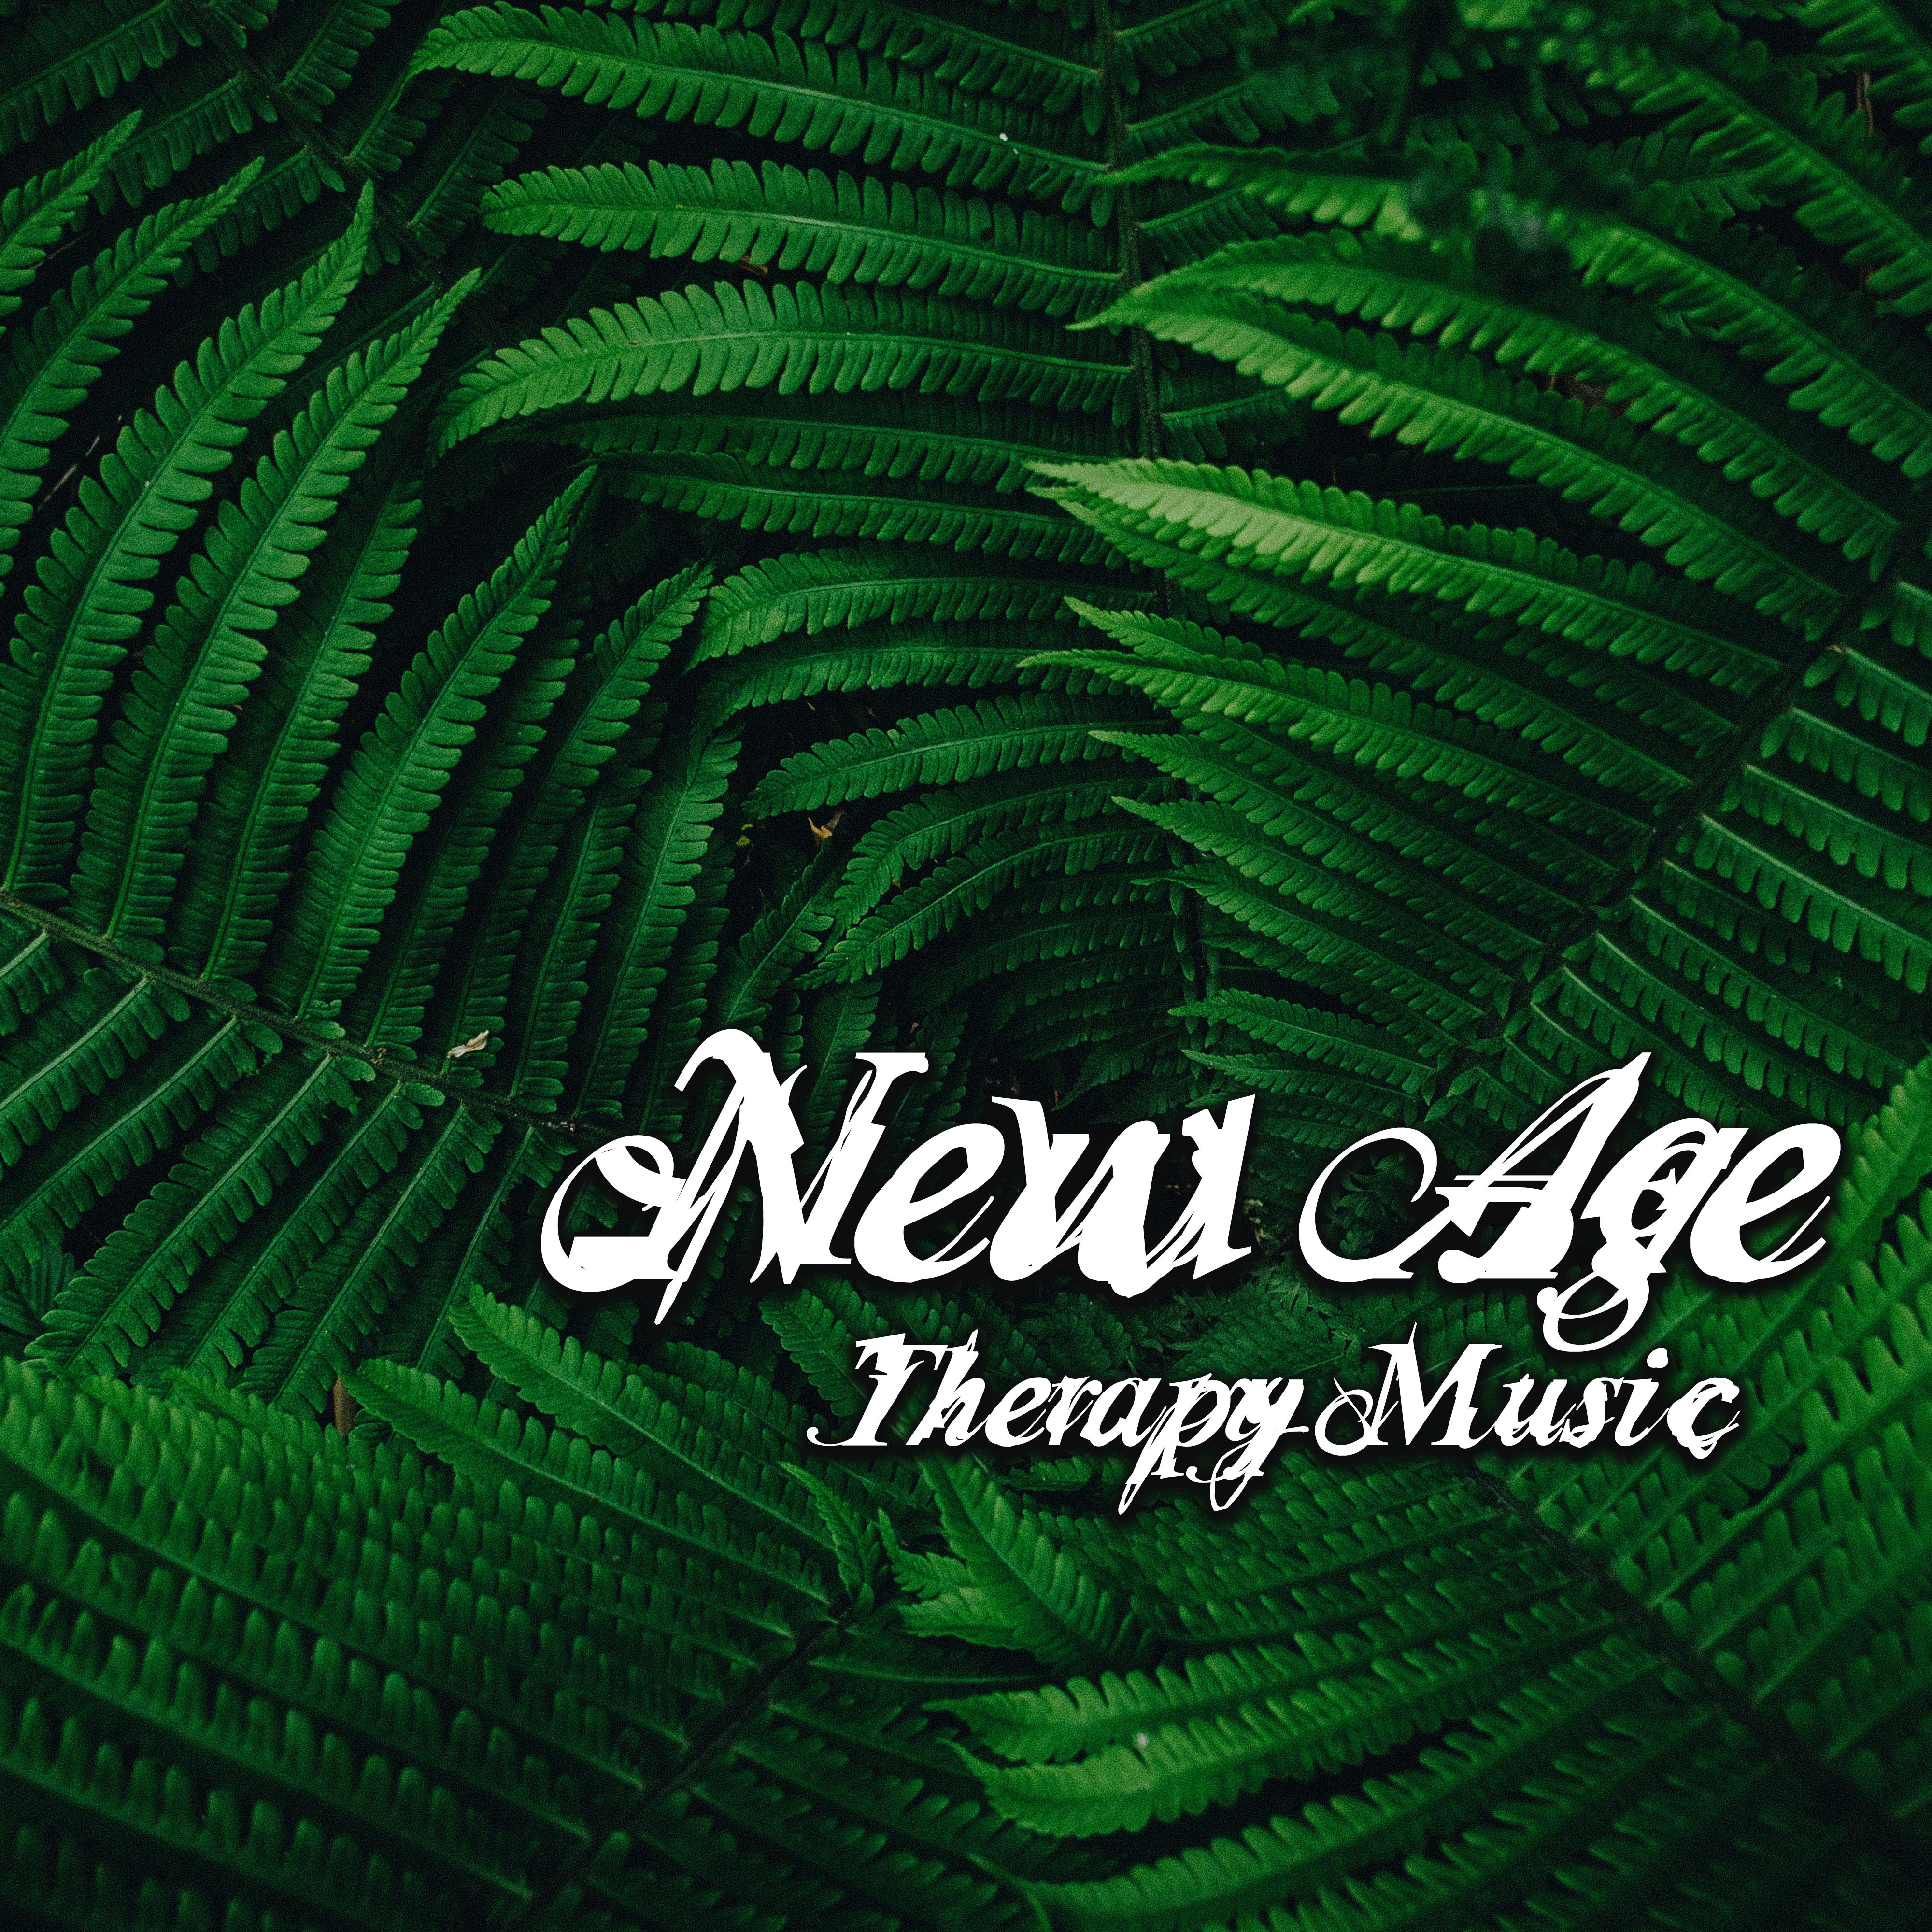 New Age Therapy Music  Calming Sounds of Nature, Music for Relax, Relief Stress, Zen